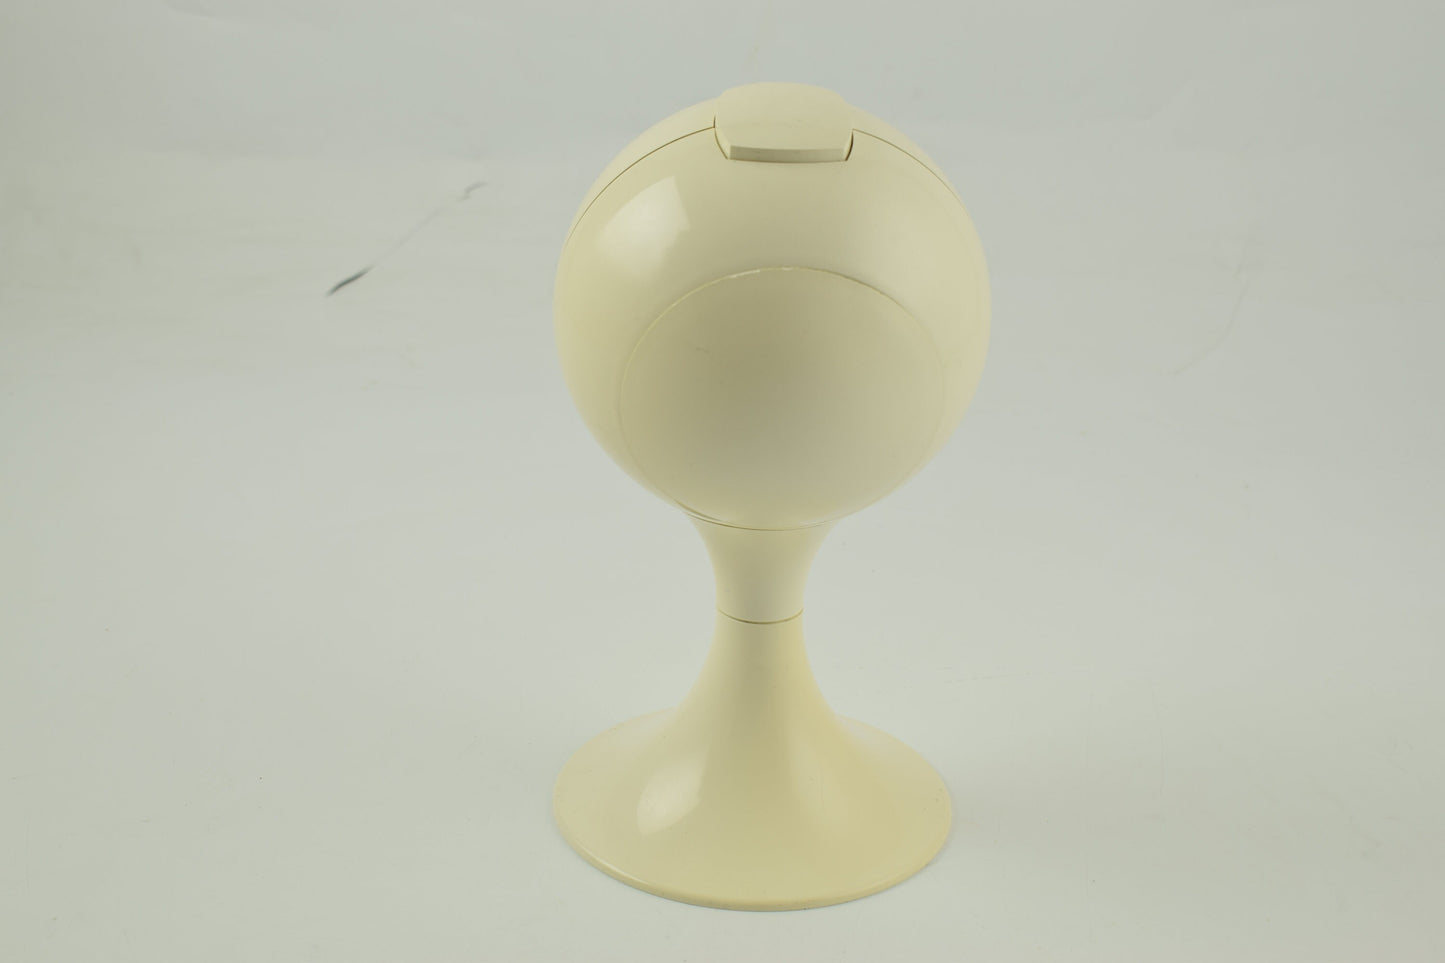 Blessing alarm clock, white pedestal tulip shape, made in Germany. Space age era, made of plastic from the early 1970S